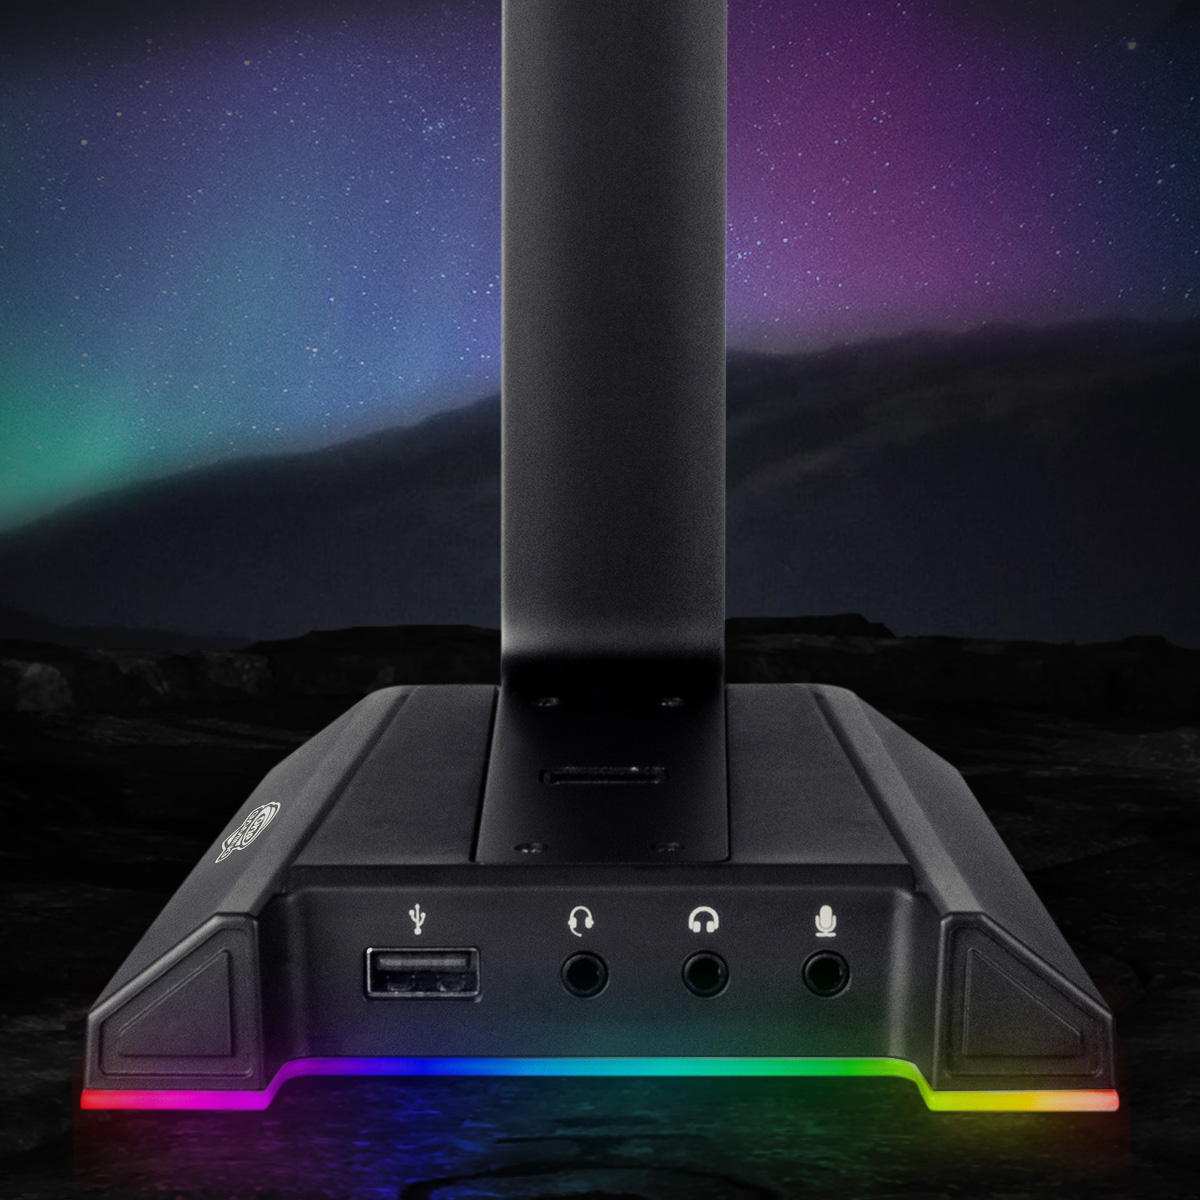 ONE GAMING RGB Stand 7.1